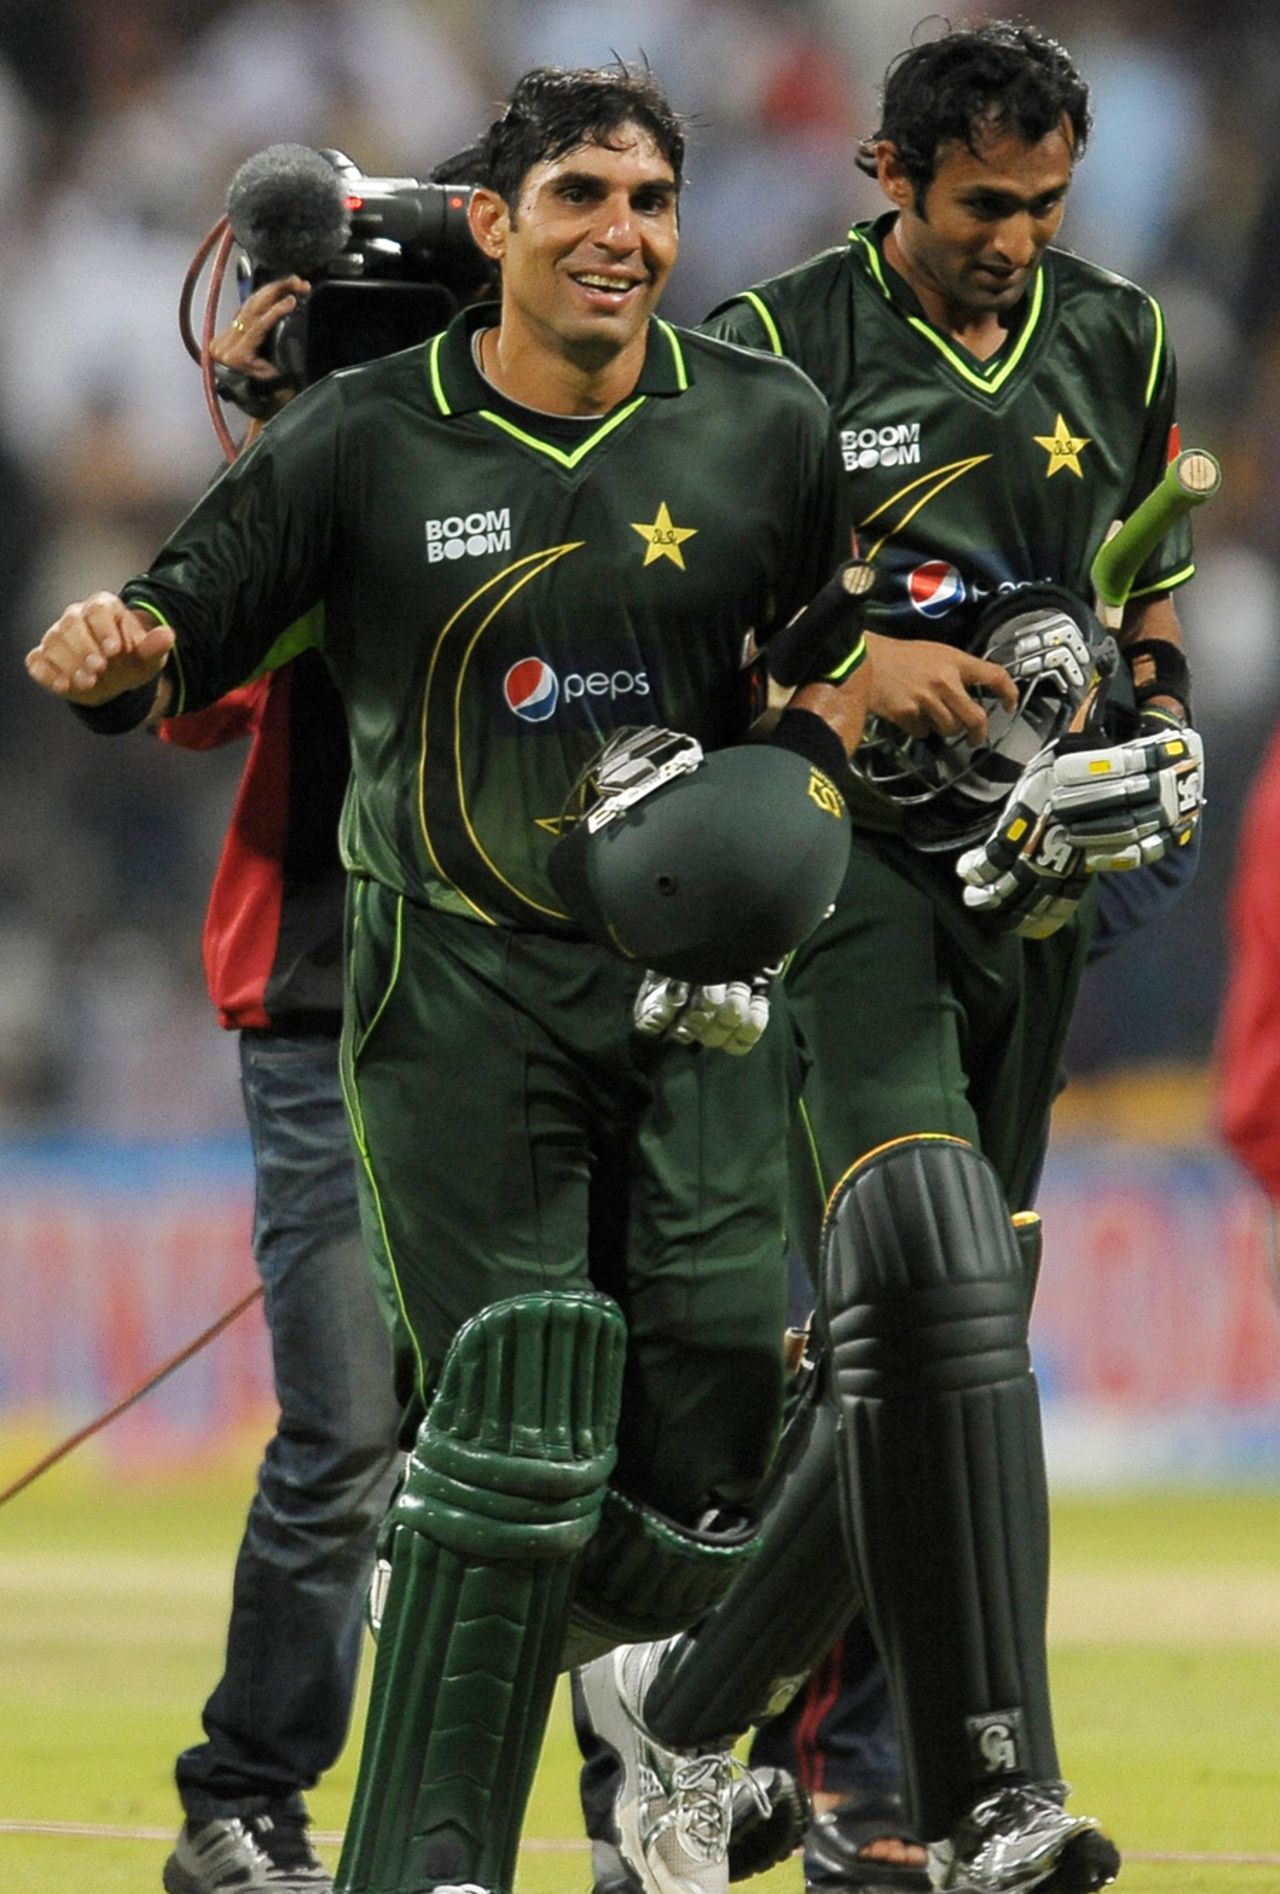 A delighted Misbah-ul-Haq after guiding Pakistan to victory, Pakistan v Sri Lanka, Only T20I, Abu Dhabi, November 25, 2011 